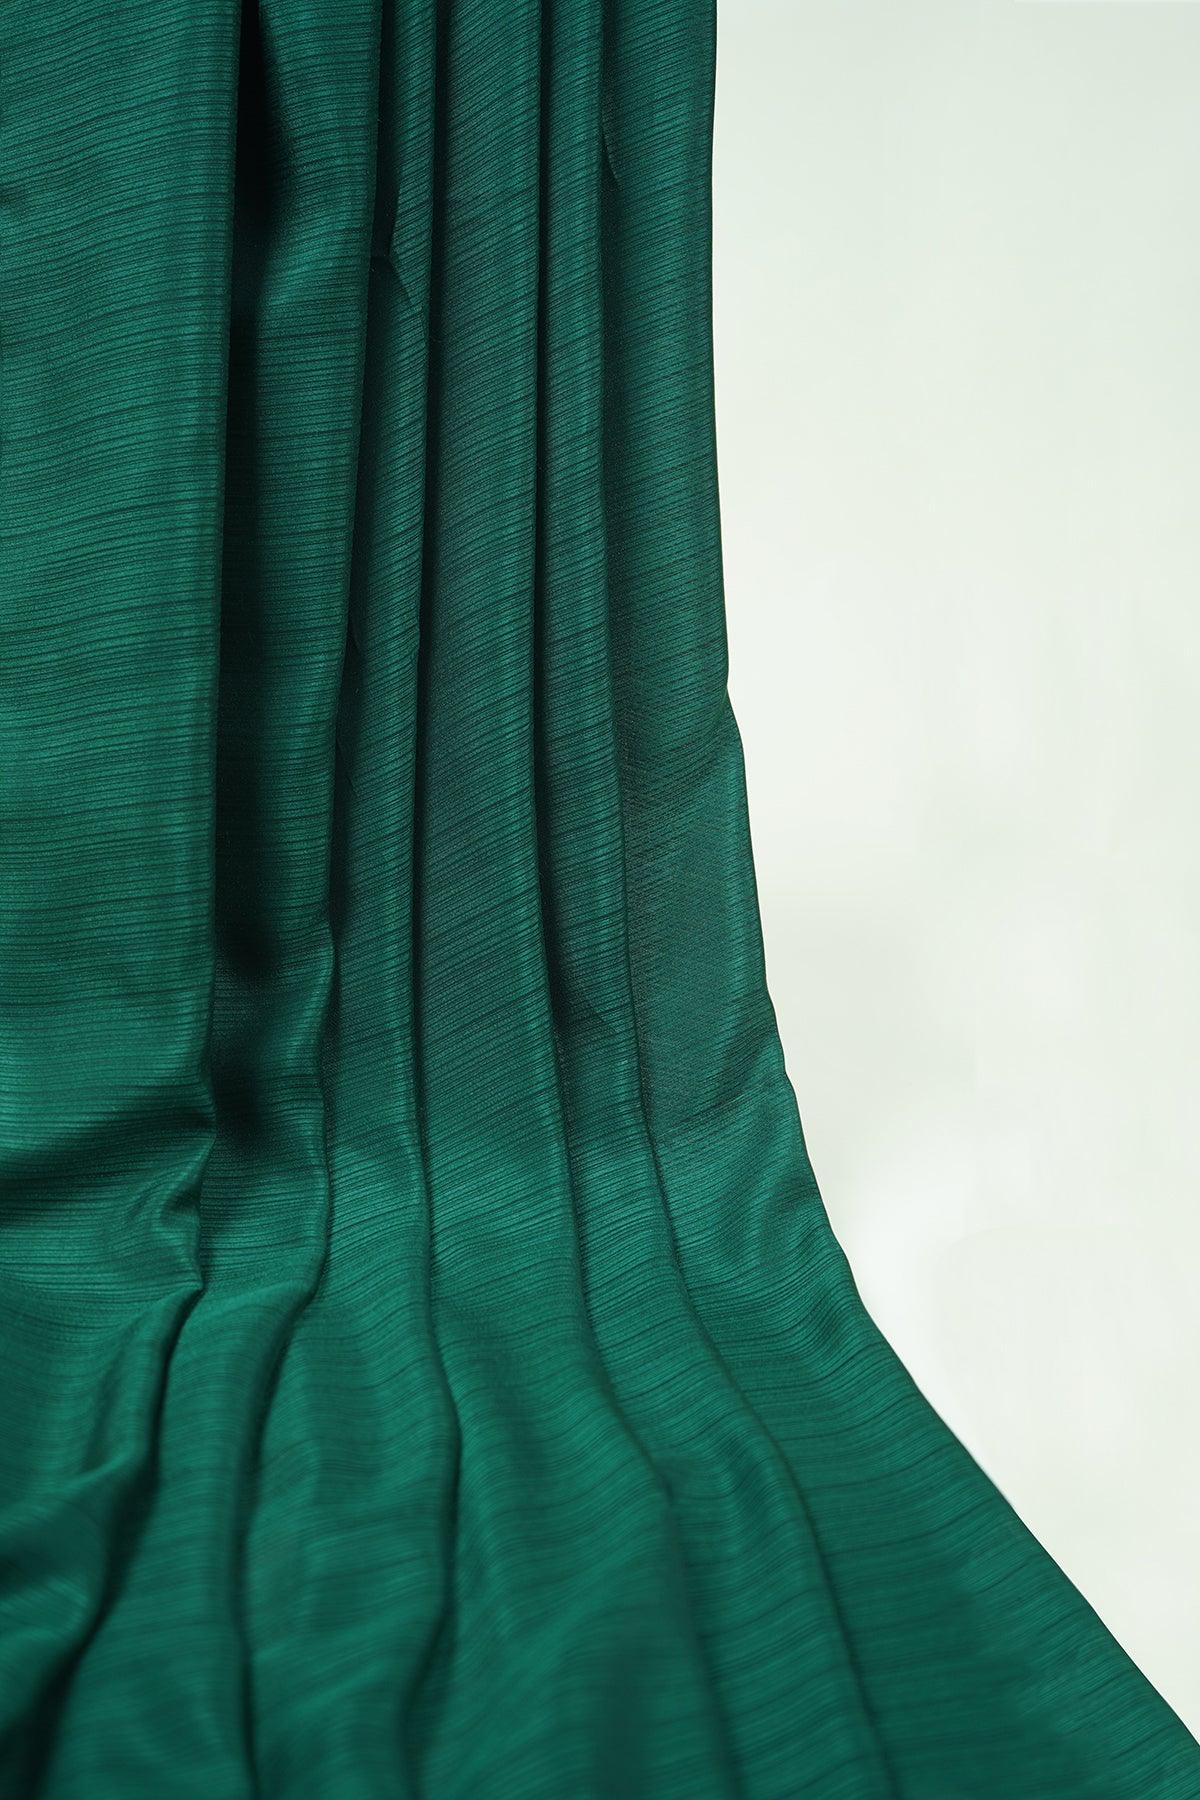 Plain Dyed Allora Silk - saraaha.com - Bright And Pastel Color Palette, Casual Wear, Dresses, Ethnic, Festive Wear, Kurtas, Kurtis, Light weight, One Pieces, Plain Dyed, Polyester, Shirts, Silk, Skirts, Textured Fabric, Women and Men Wear